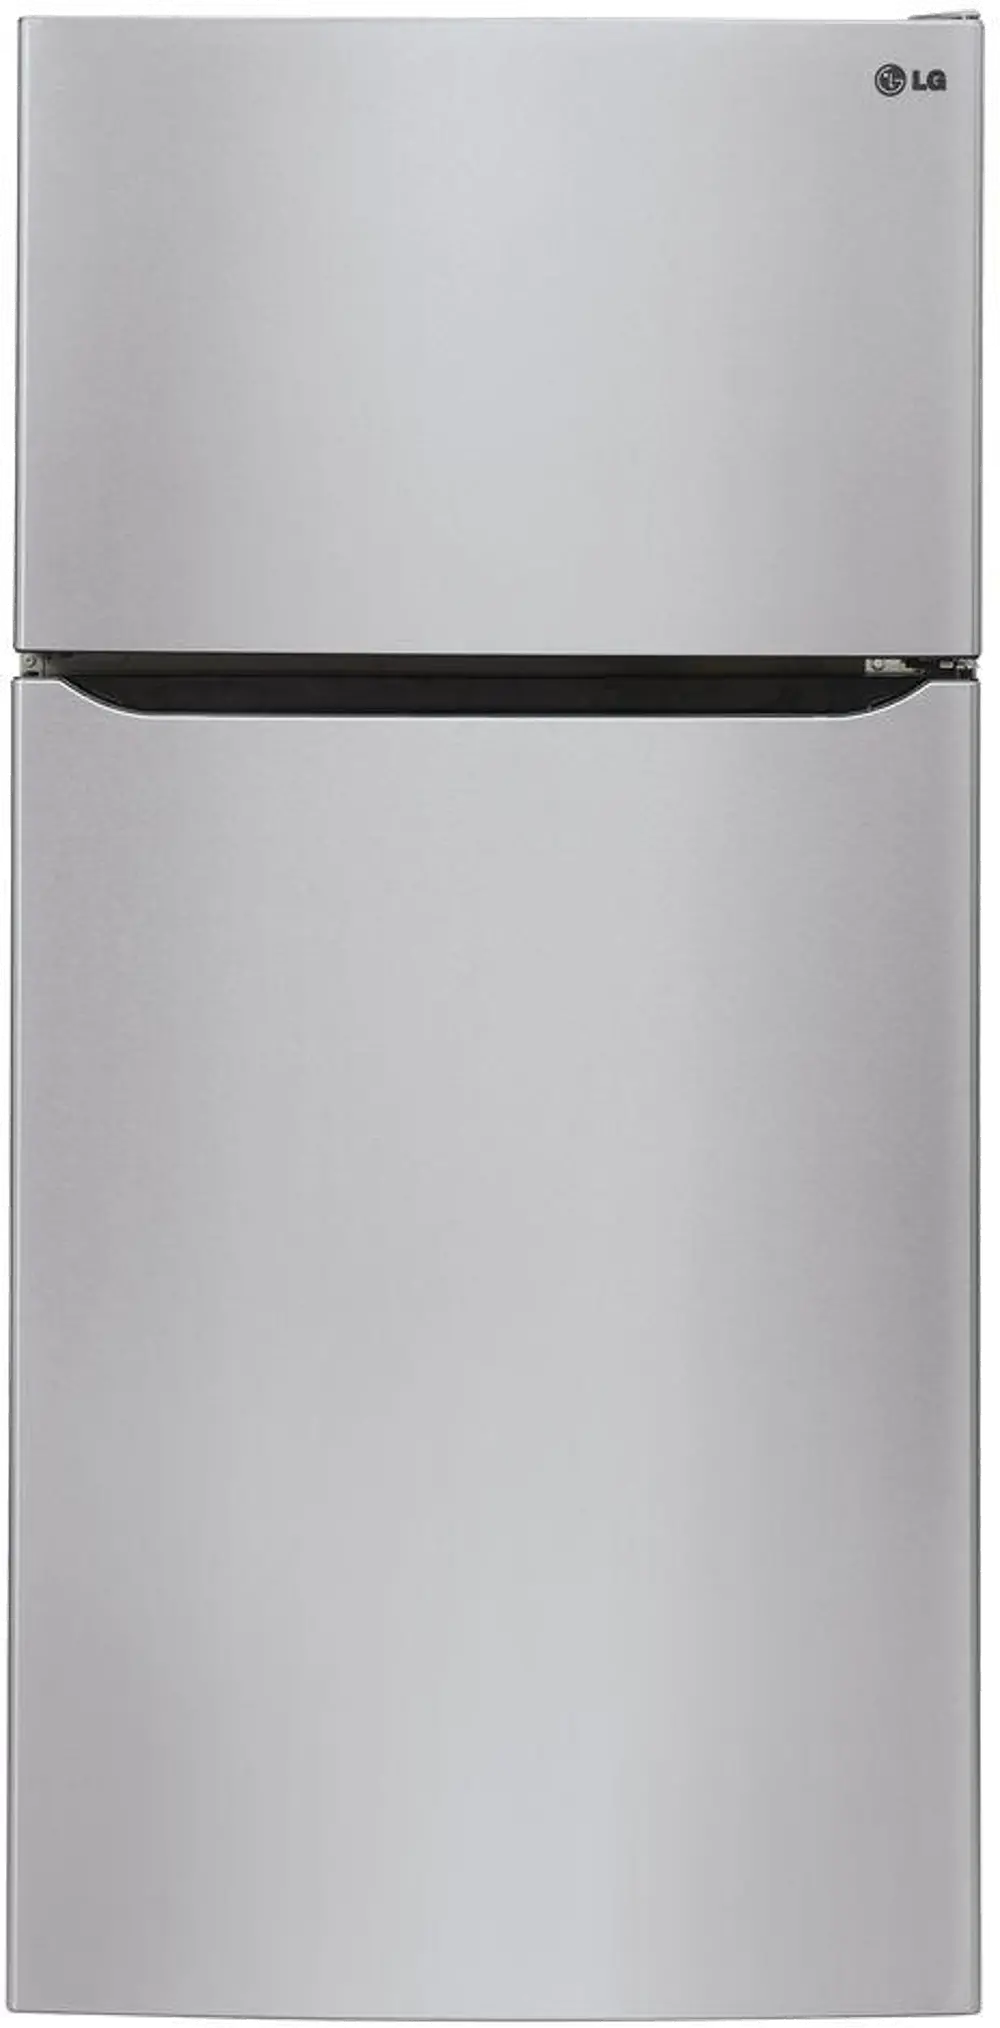 LTCS20220S LG 20.2 cu. ft. Top Freezer Refrigerator with Ice Maker - 30 Inch Stainless Steel-1